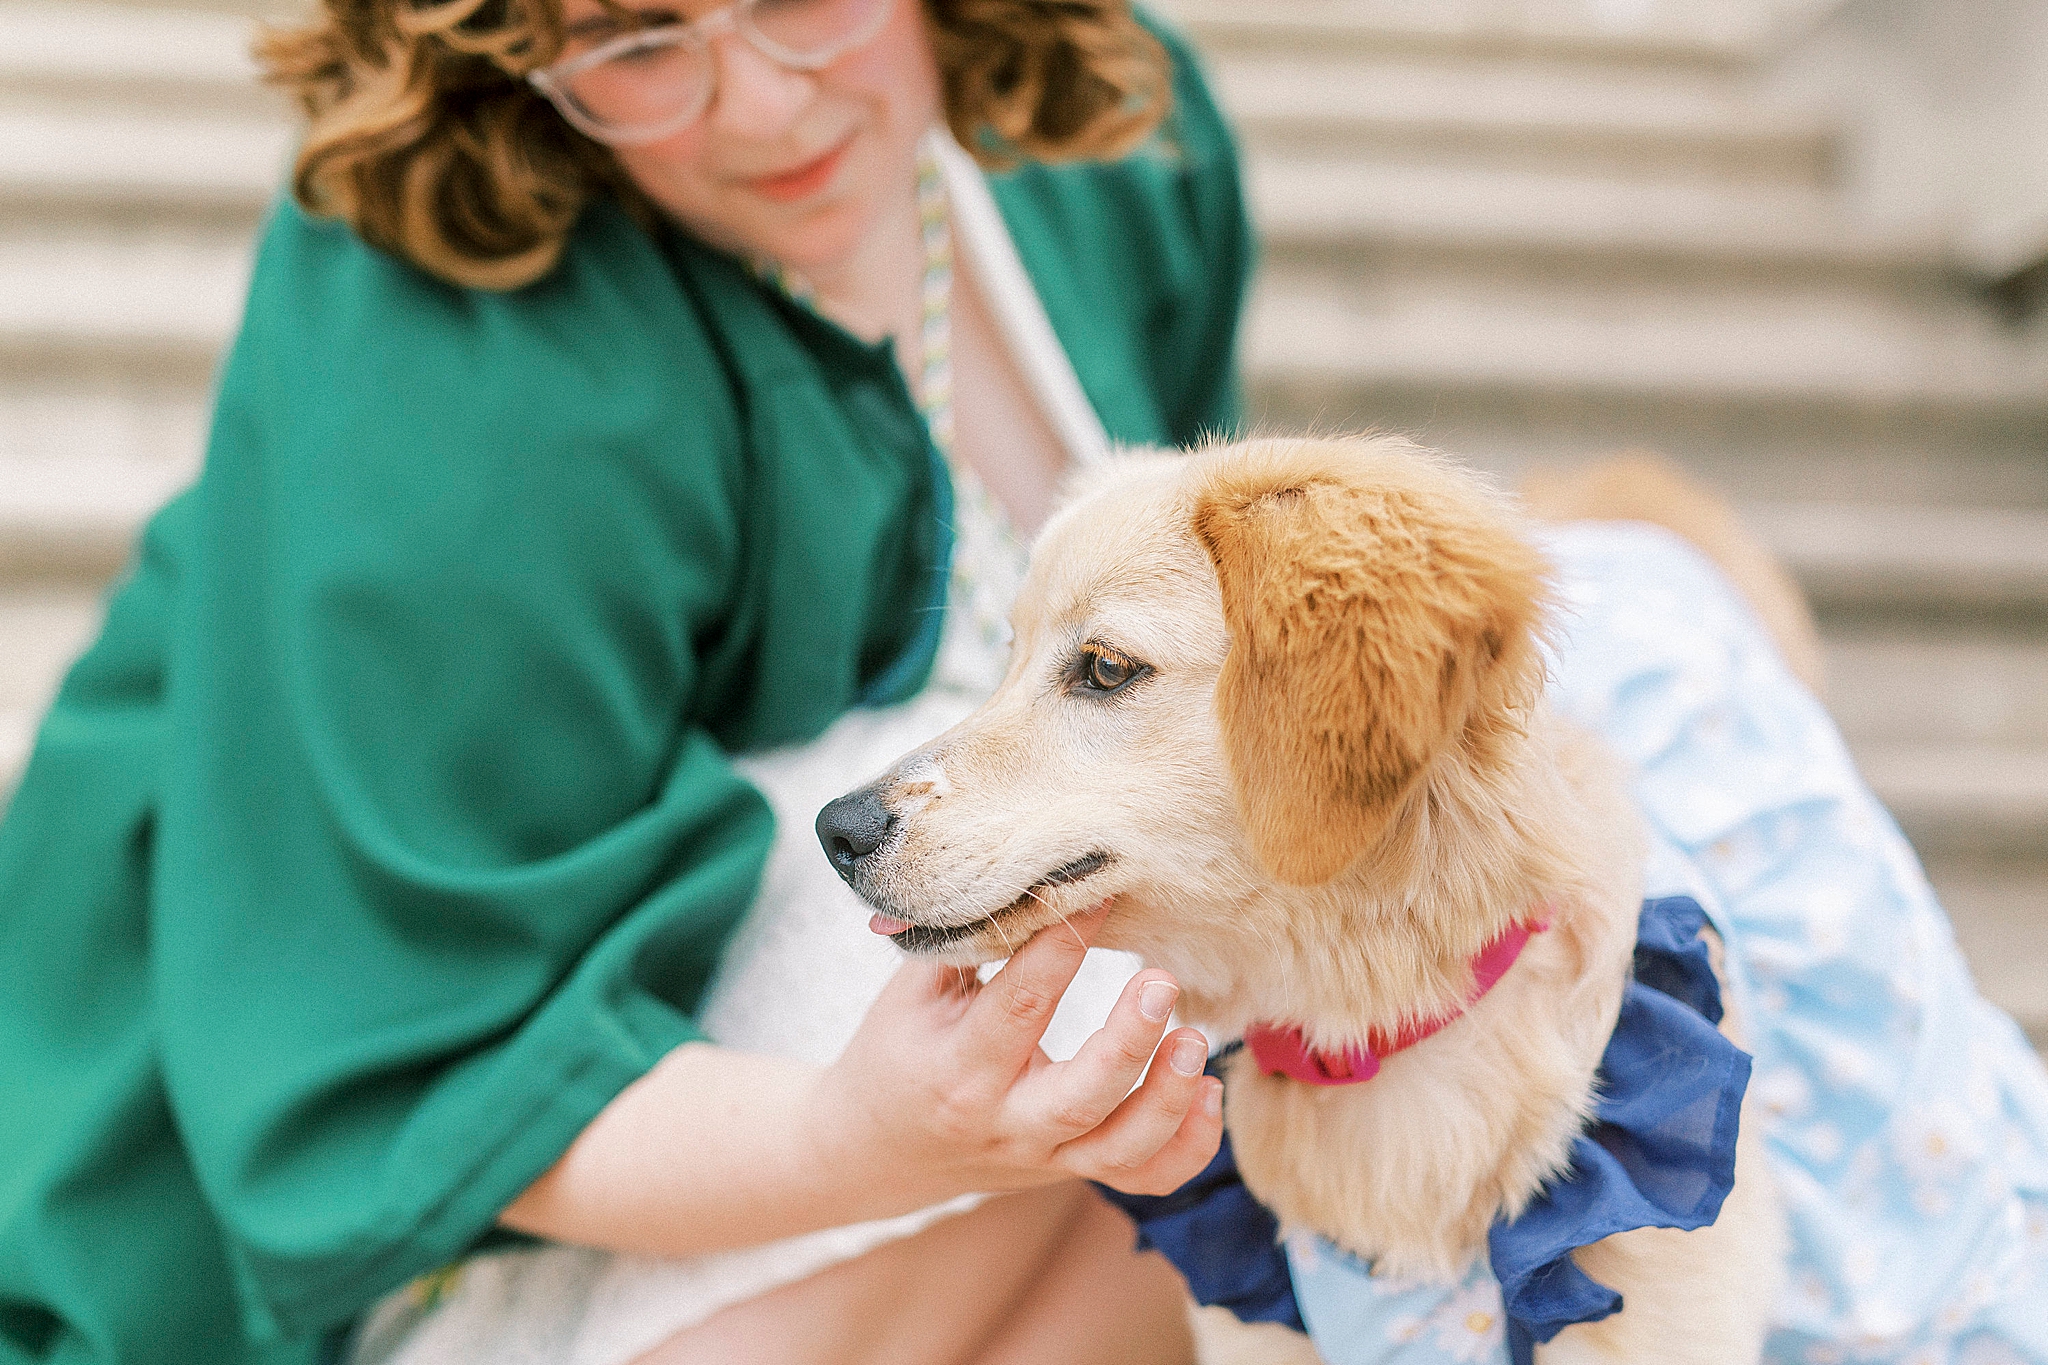 UNCC senior pictures with graduate and dog